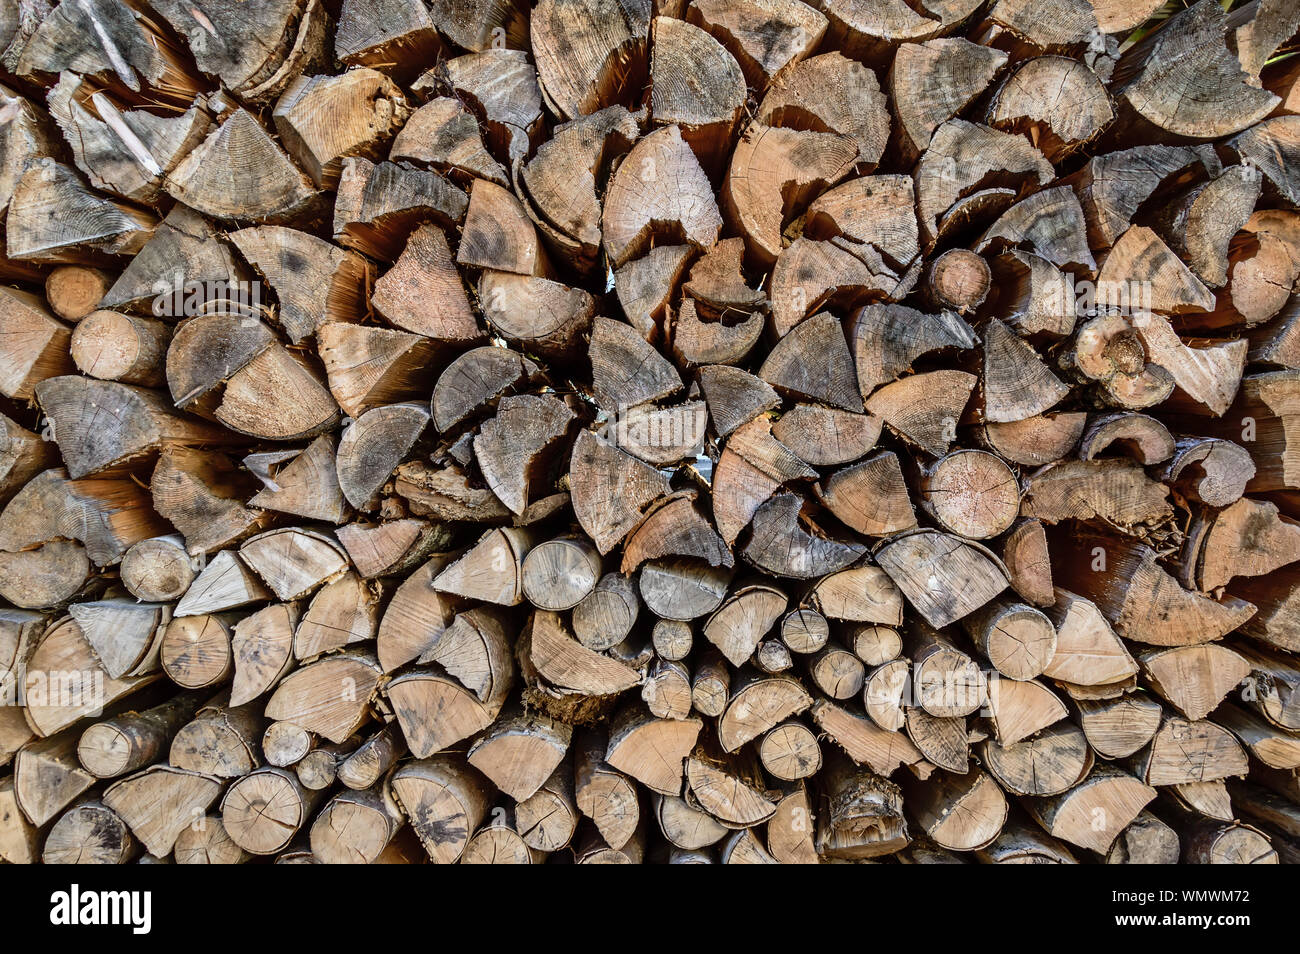 Stack of sawn tree logs detail. Stacked pile of wood logs stored for winter as firewood. Lumber industry. Wooden textured background Stock Photo